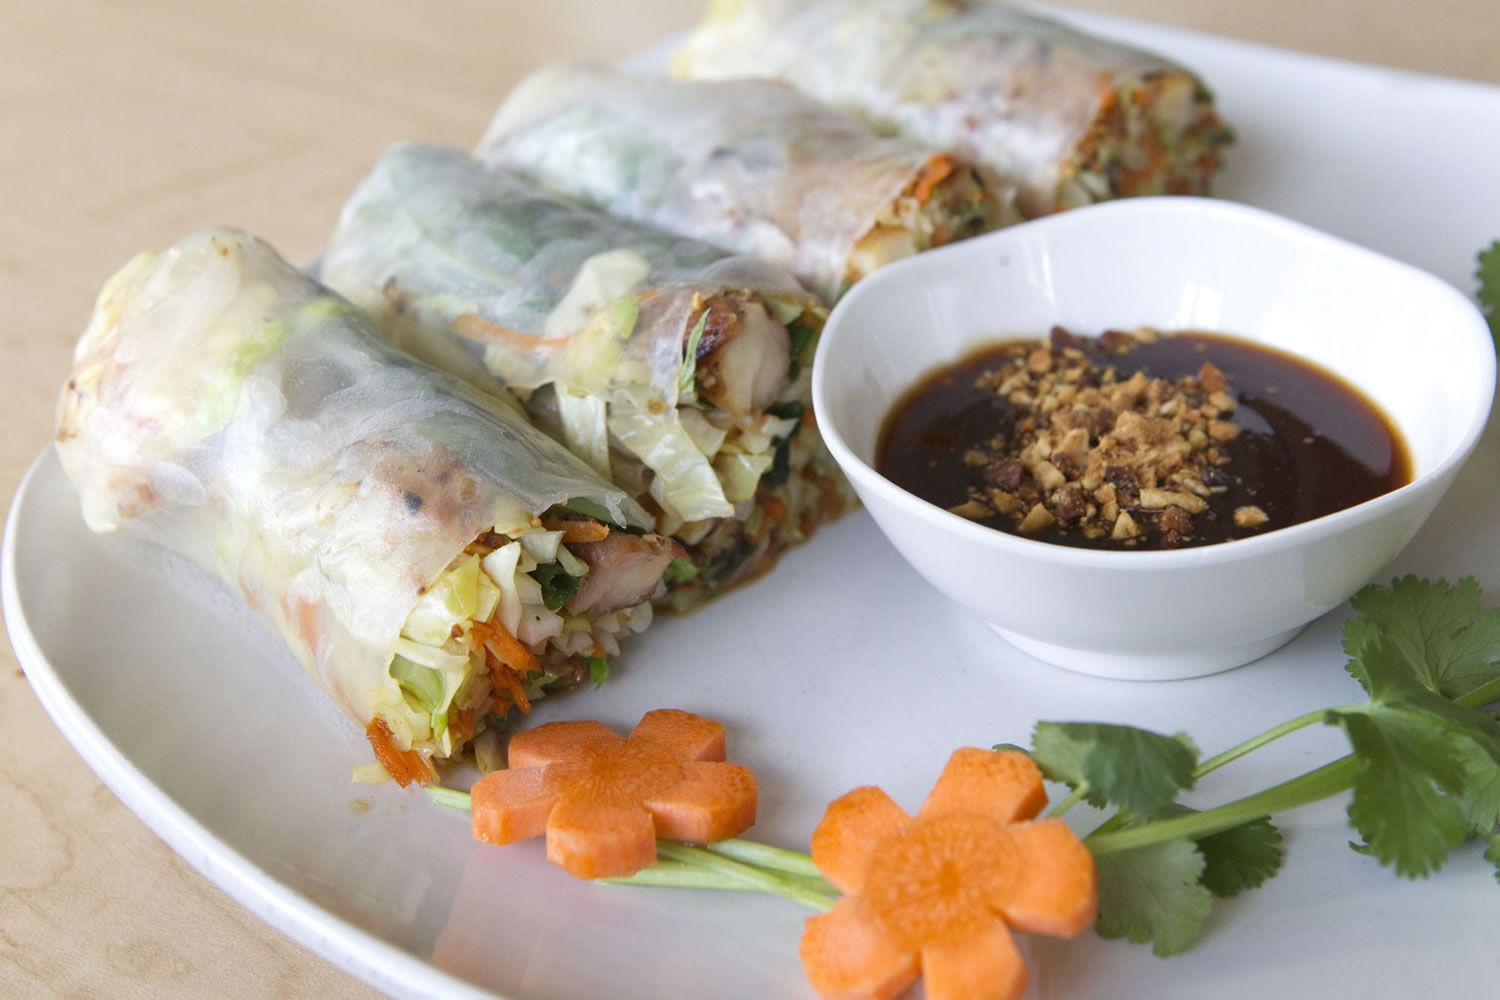 Saigon rolls with chicken are served at the Bamboo Hut in Vancouver on Jan.